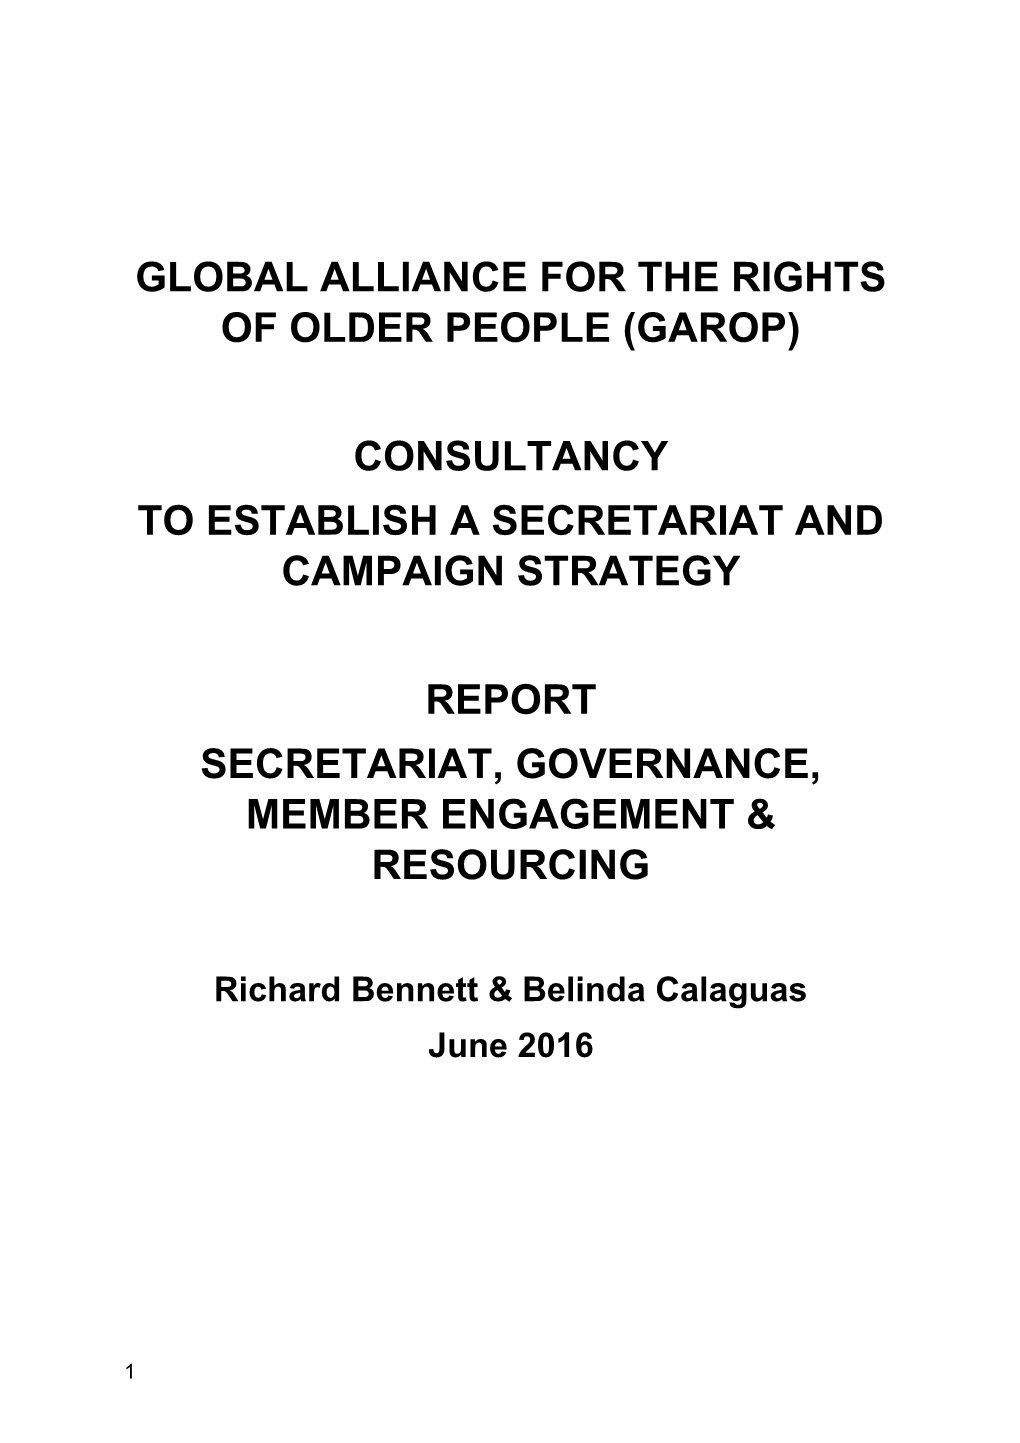 Global Alliance for the Rights of Older People (Garop)